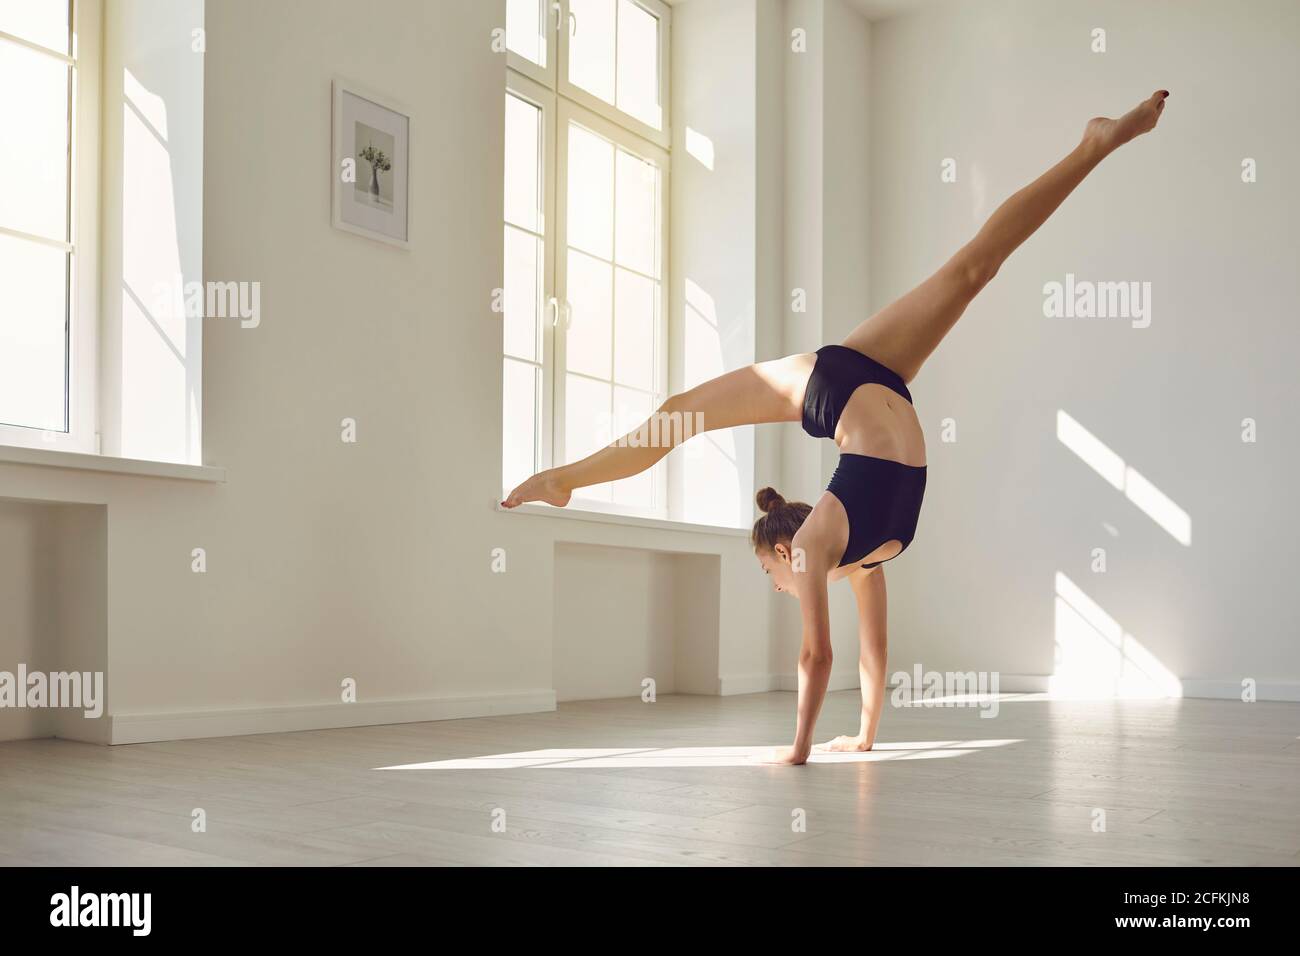 Slender gymnast in sports bra top and shorts doing handstand while  practicing gymnastics in studio Stock Photo - Alamy